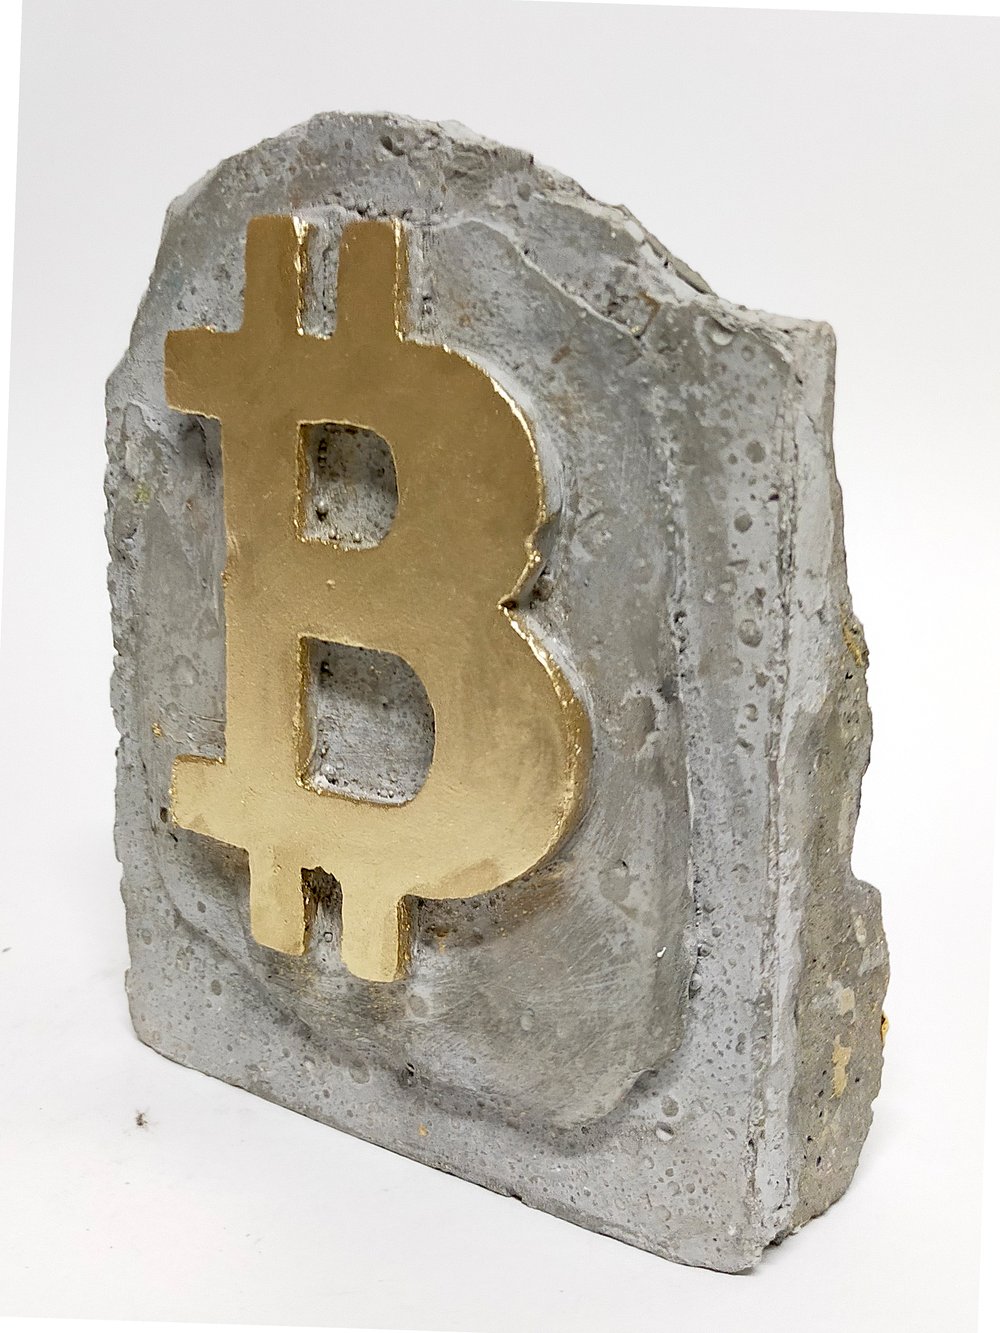 BITCOIN TROPHY (2) ORIGINAL & SIGNED BY ARTIST.